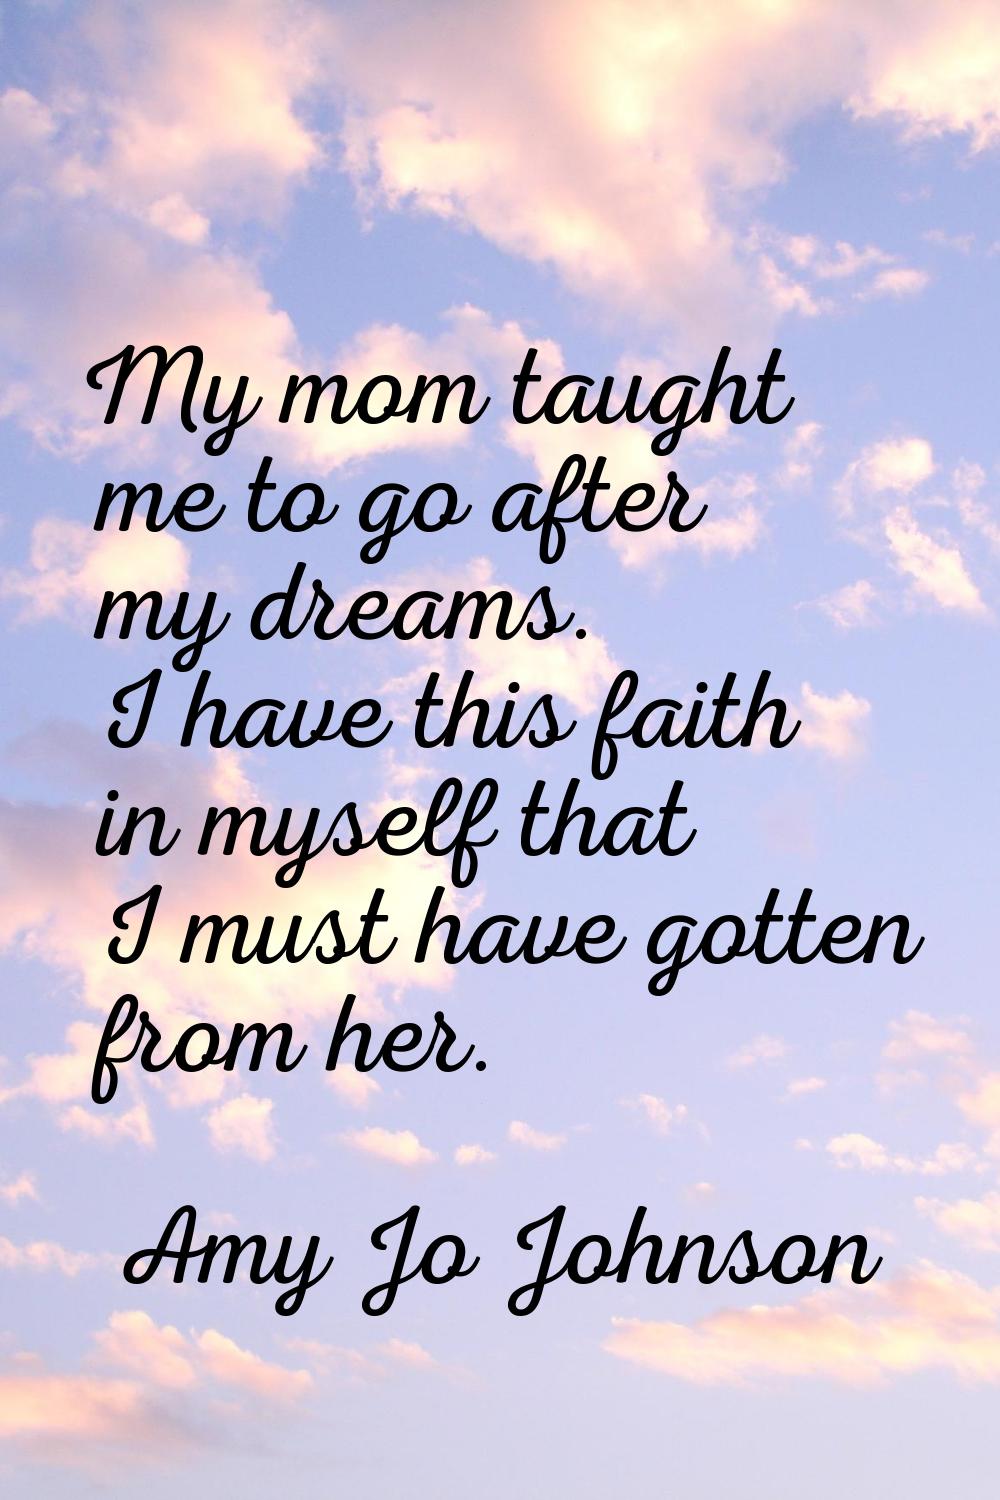 My mom taught me to go after my dreams. I have this faith in myself that I must have gotten from he